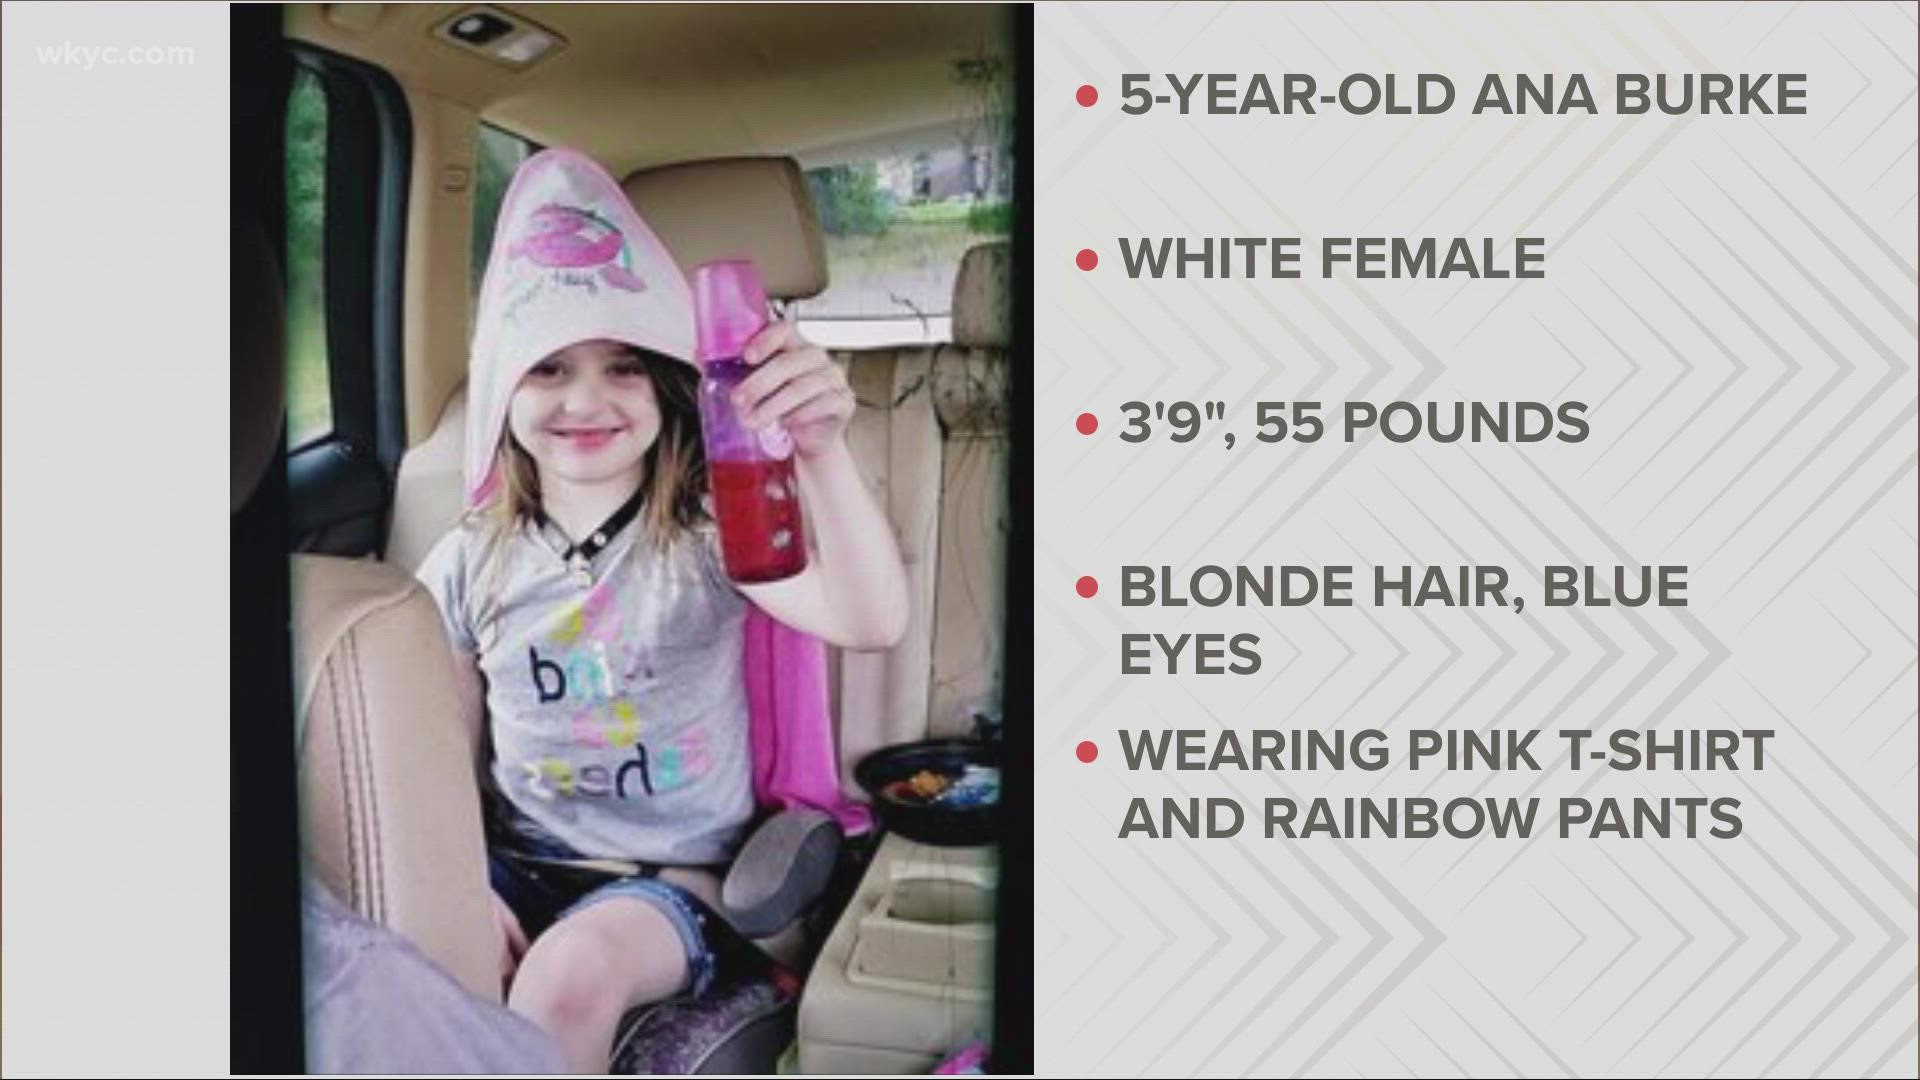 Authorities are asking for the public's help in finding 5-year-old Ana Burke, who was last seen in Canton on Thursday afternoon.